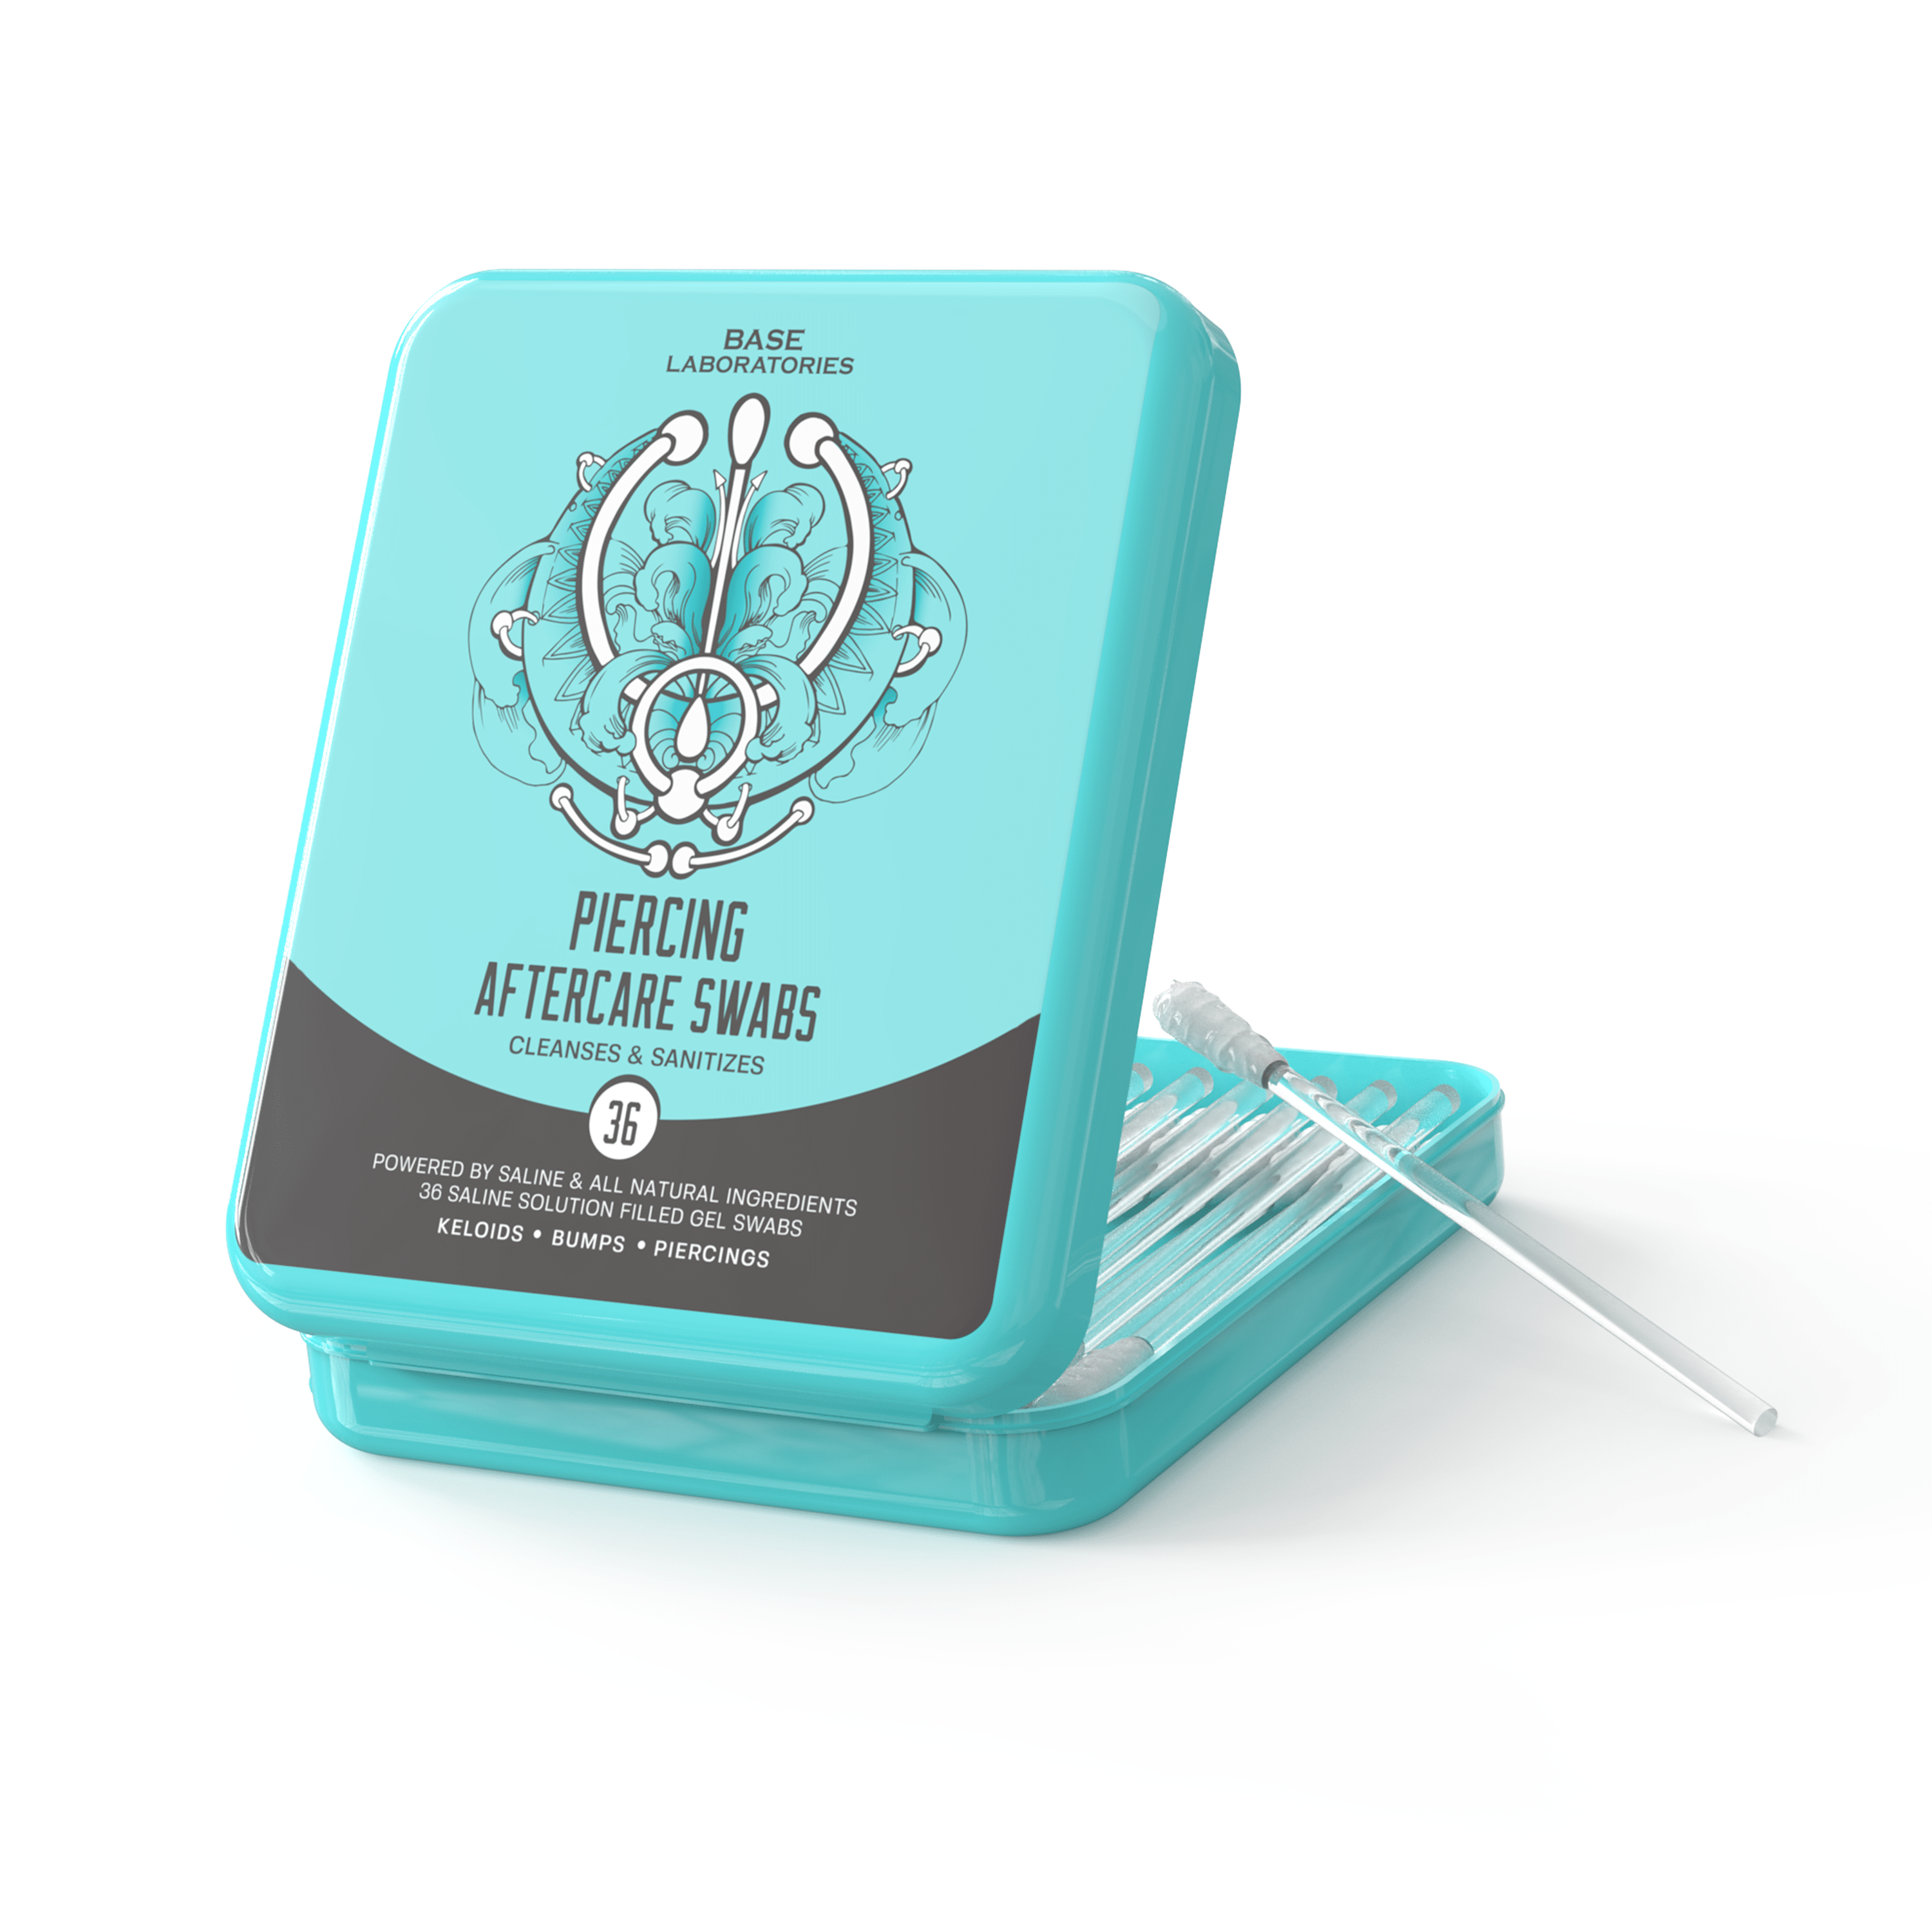 Dr. Piercing Aftercare Wipes - Gentle Wound Wash Saline Solution